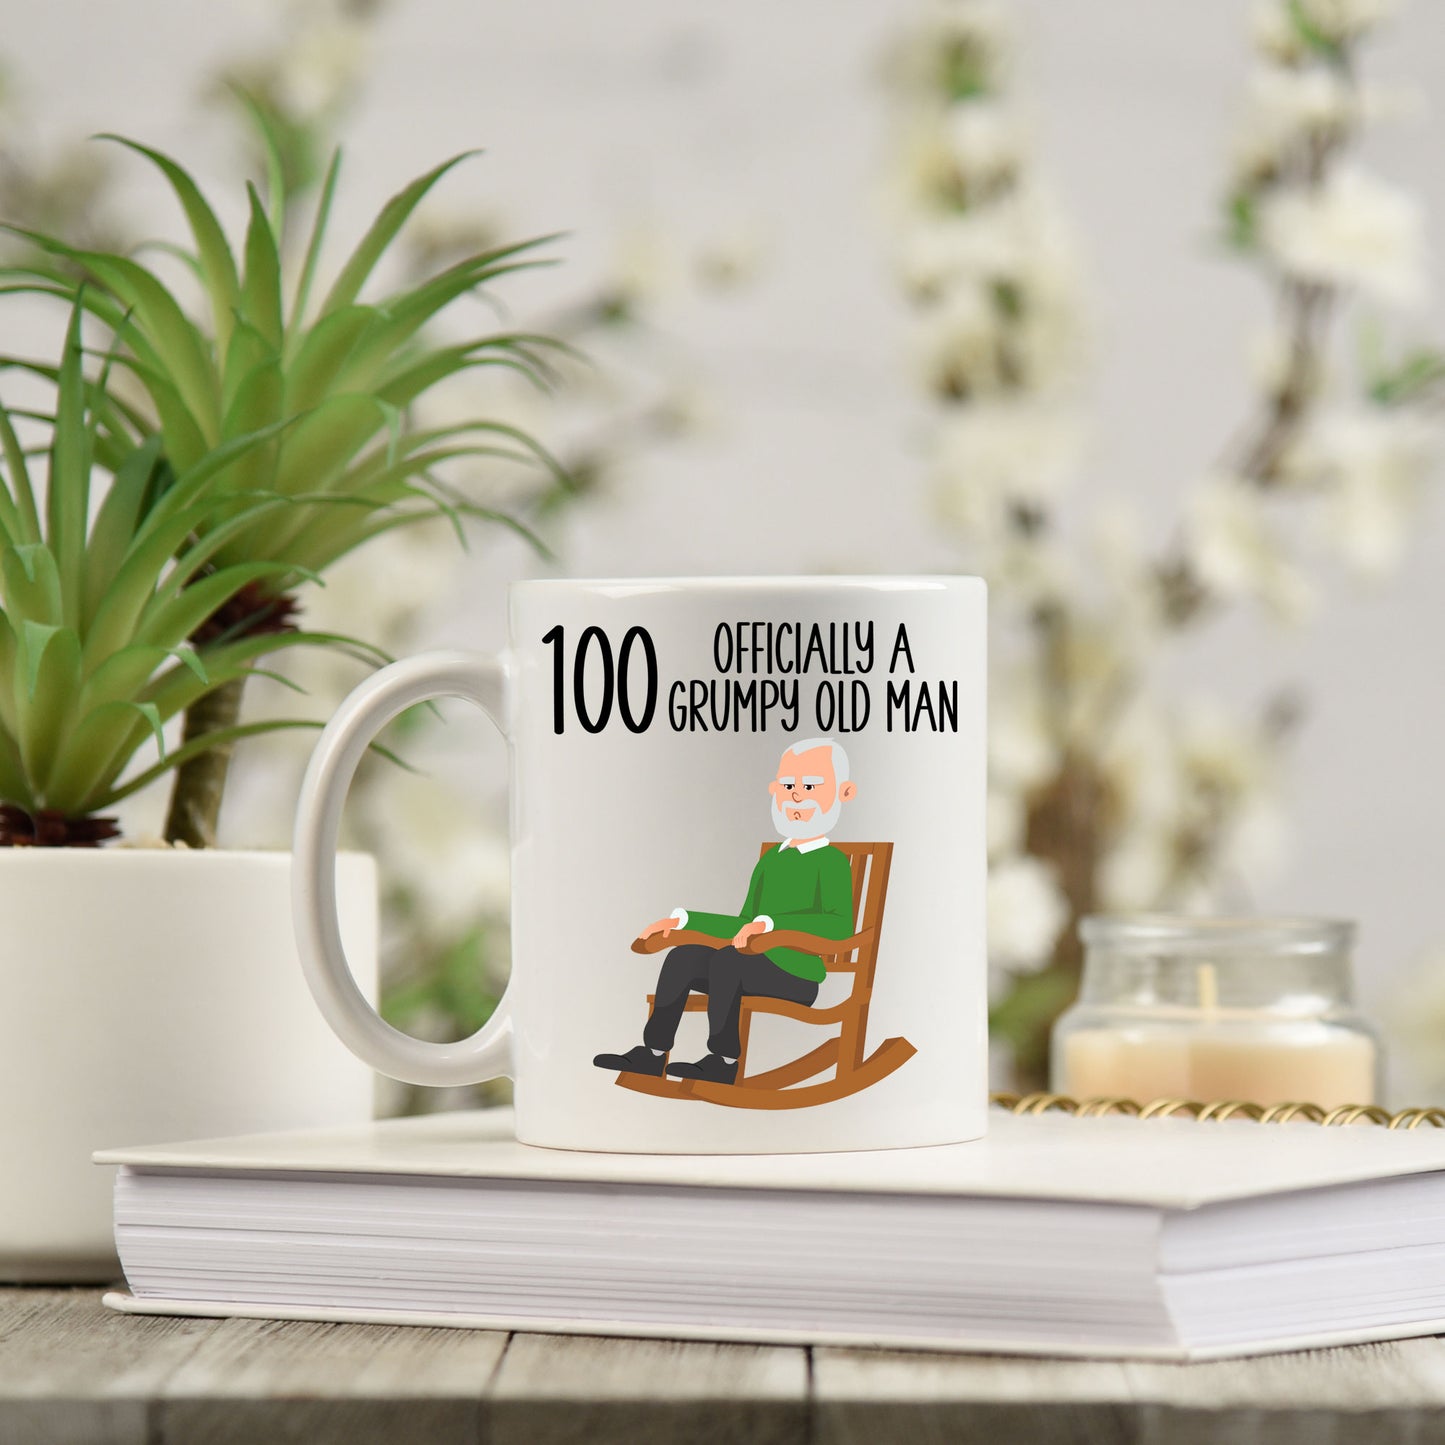 100th Officially A Grumpy Old Man Mug and/or Coaster Gift  - Always Looking Good - Mug On Its Own  